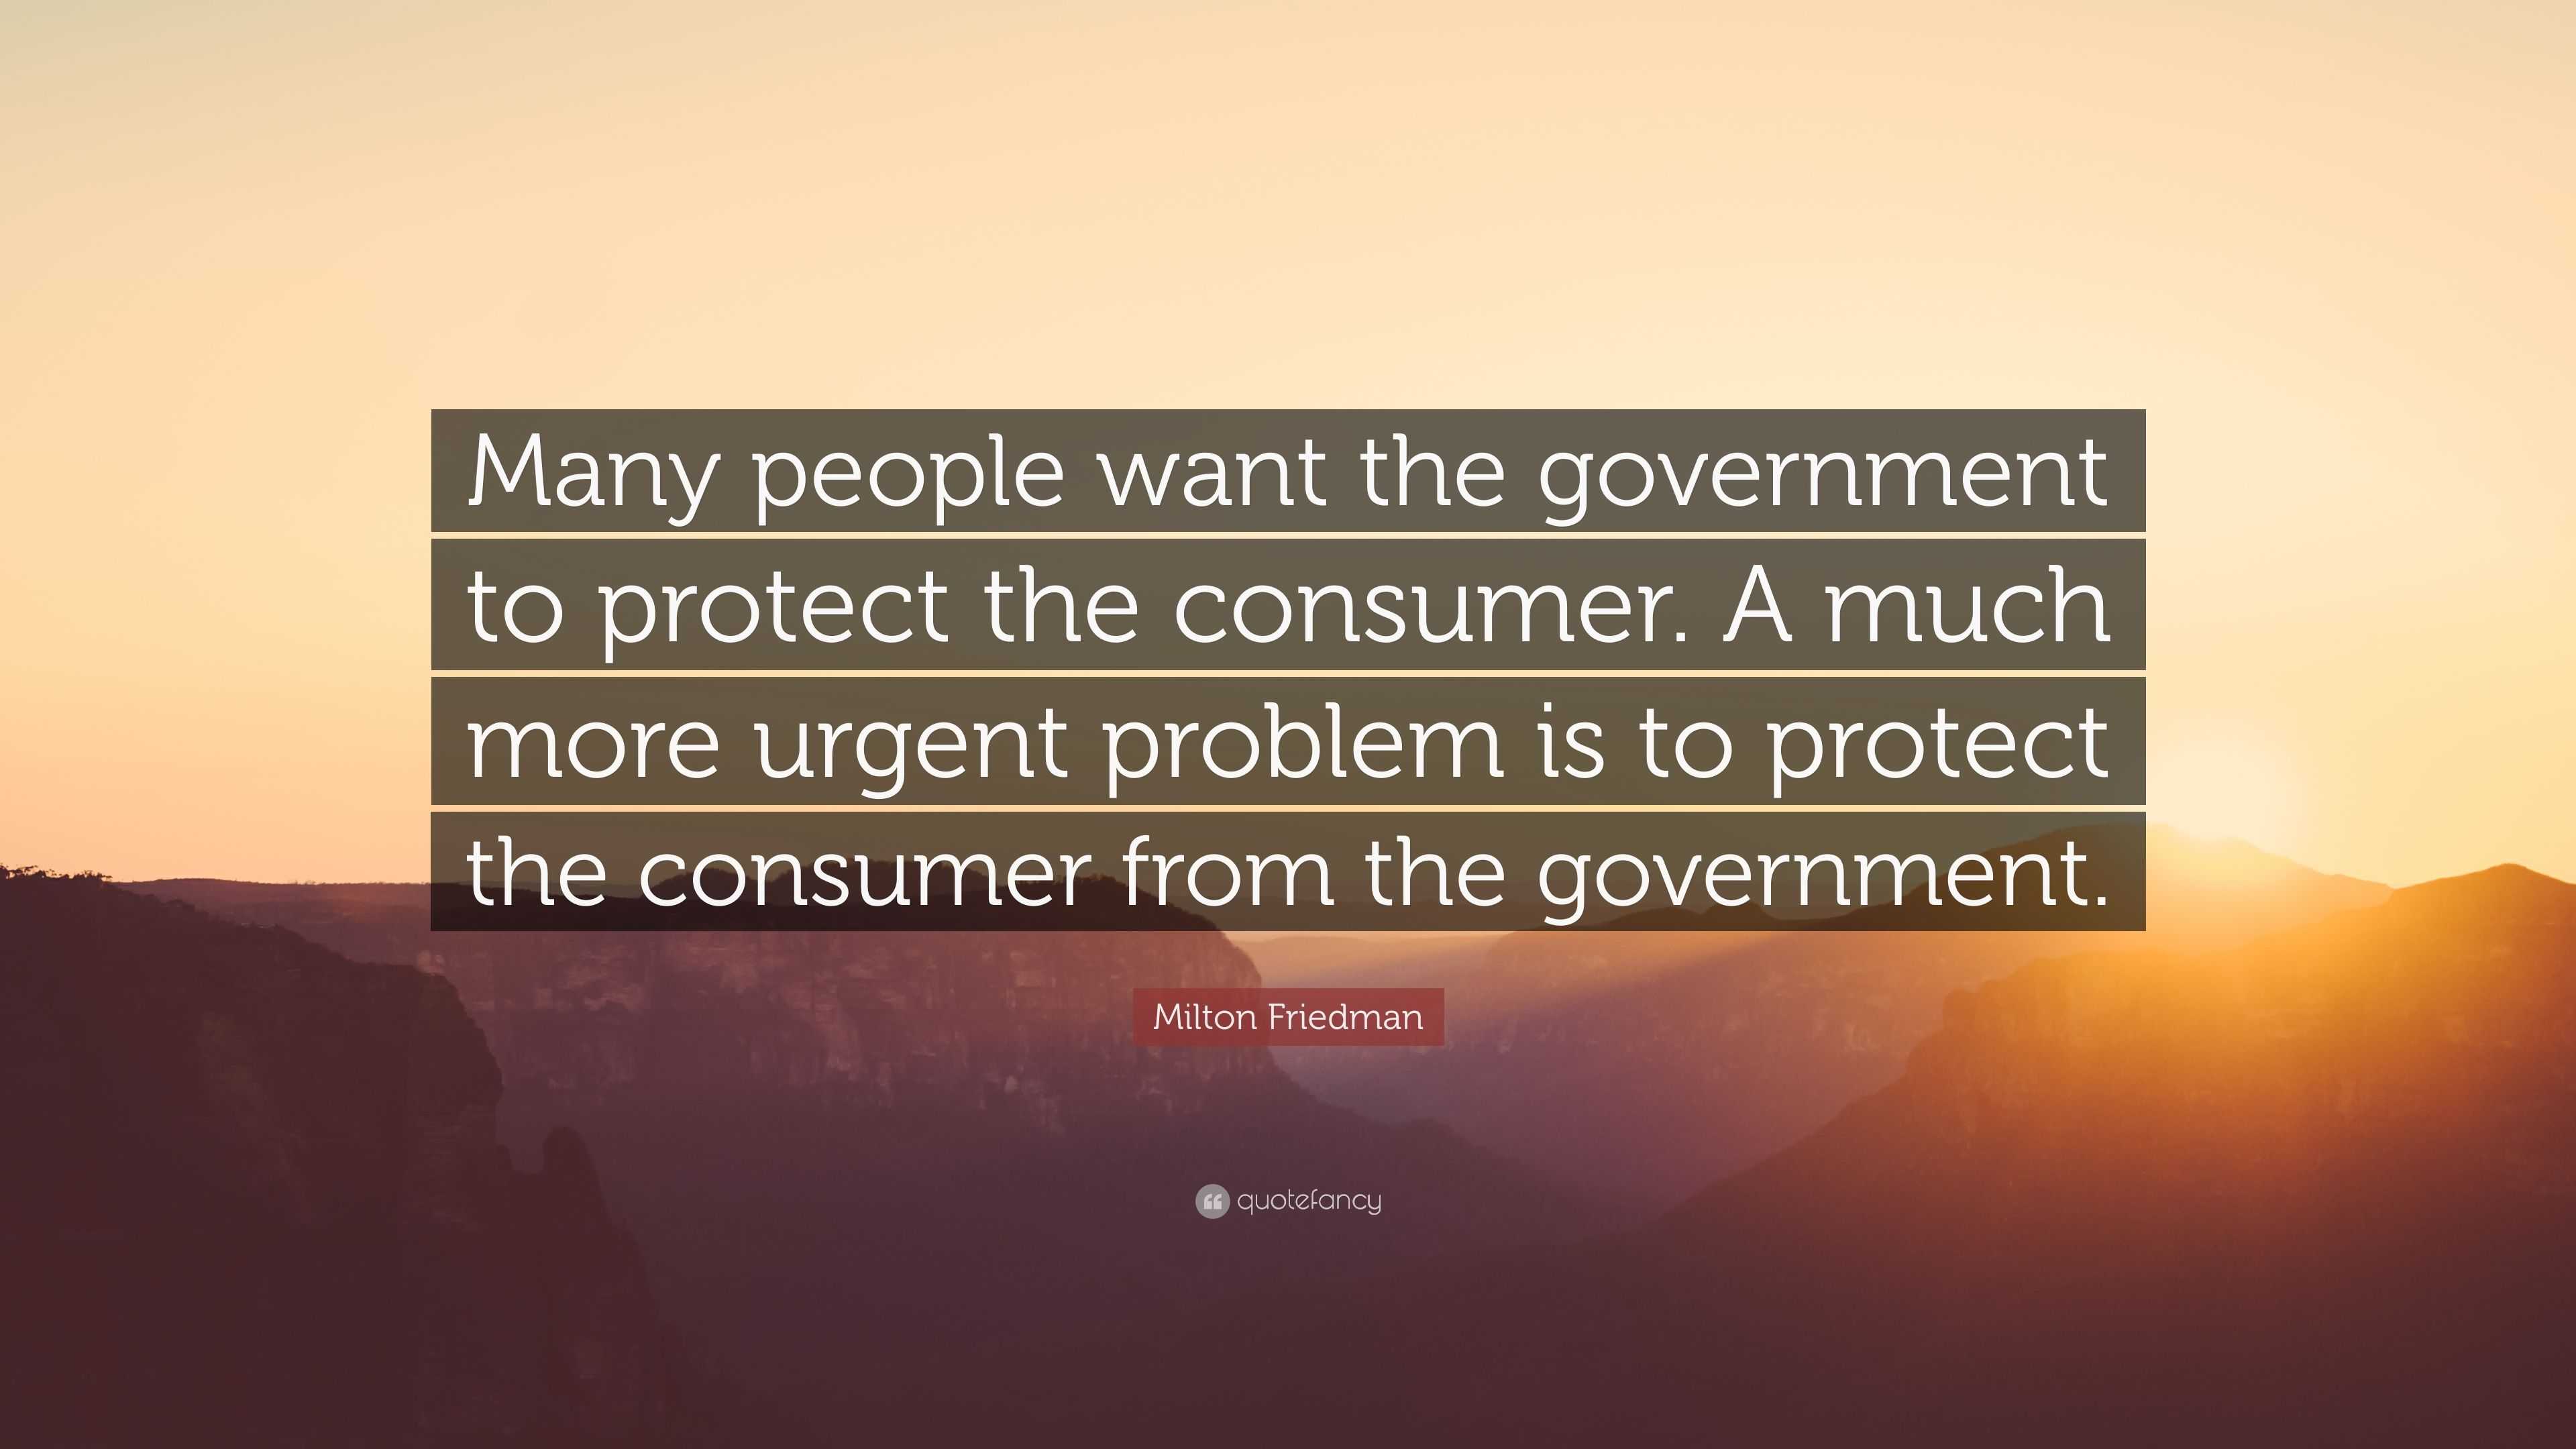 https://quotefancy.com/media/wallpaper/3840x2160/3742765-Milton-Friedman-Quote-Many-people-want-the-government-to-protect.jpg